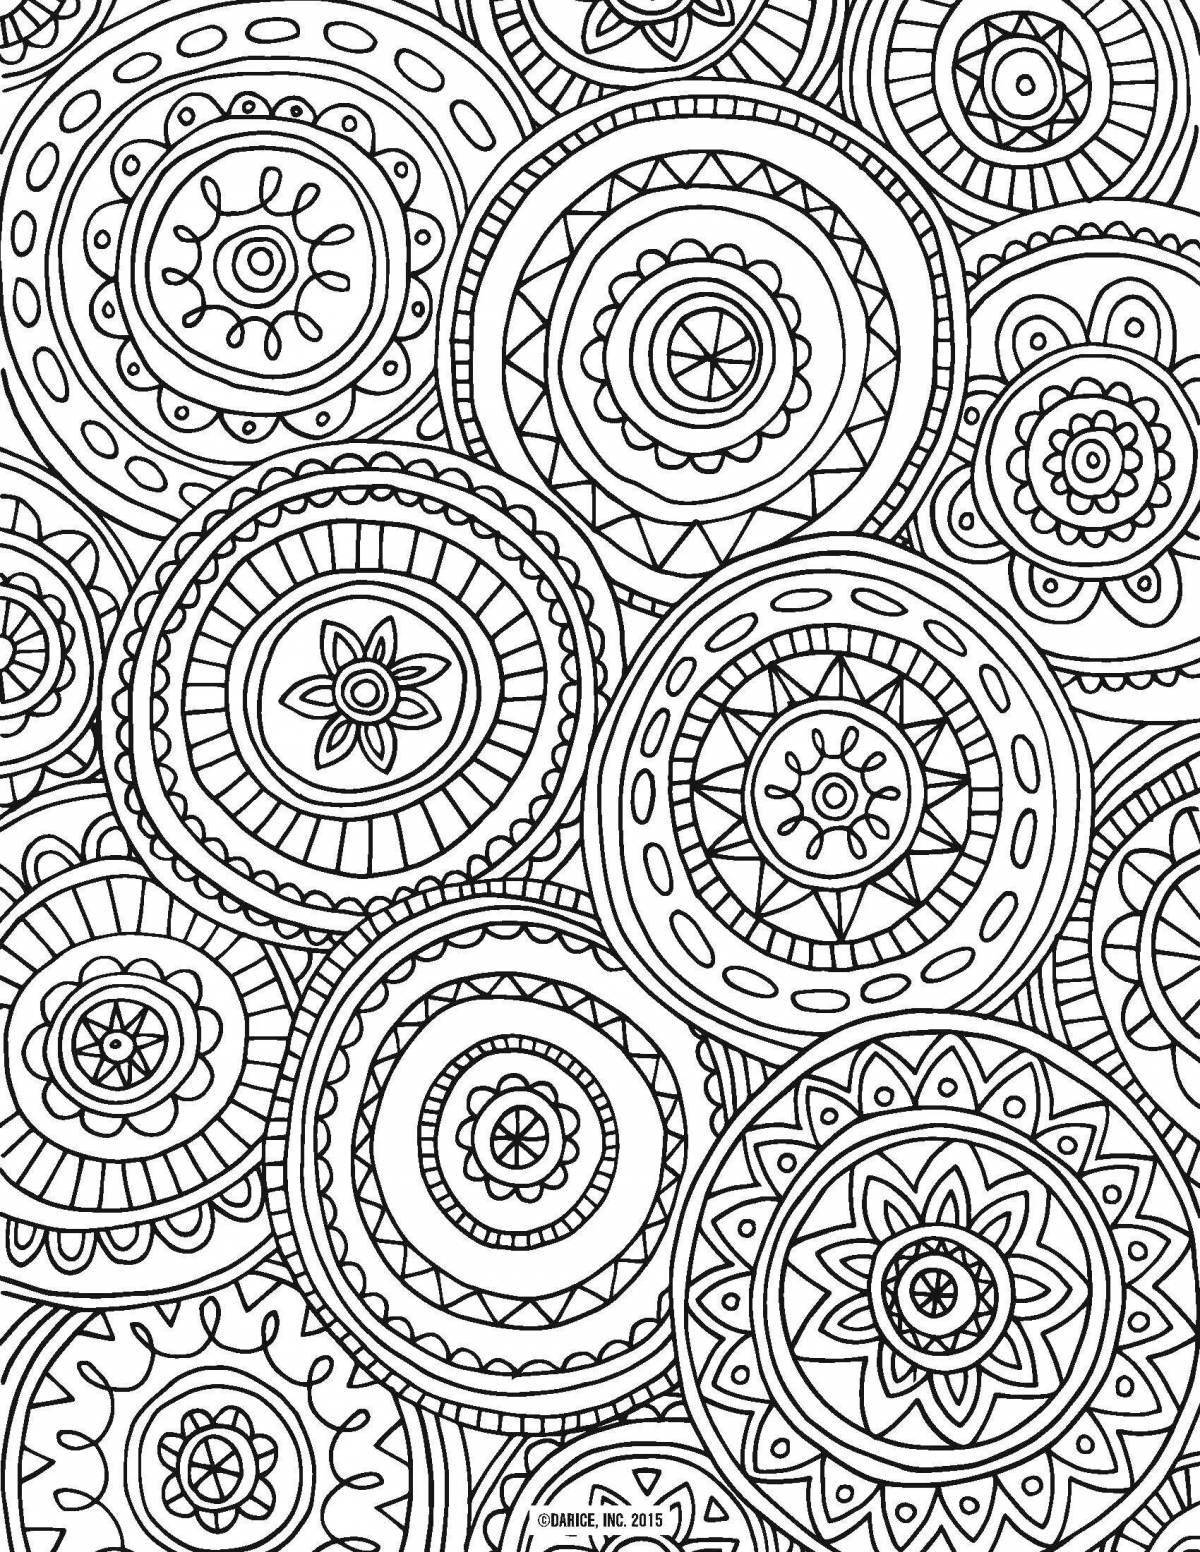 Elegant patterns and ornaments for coloring